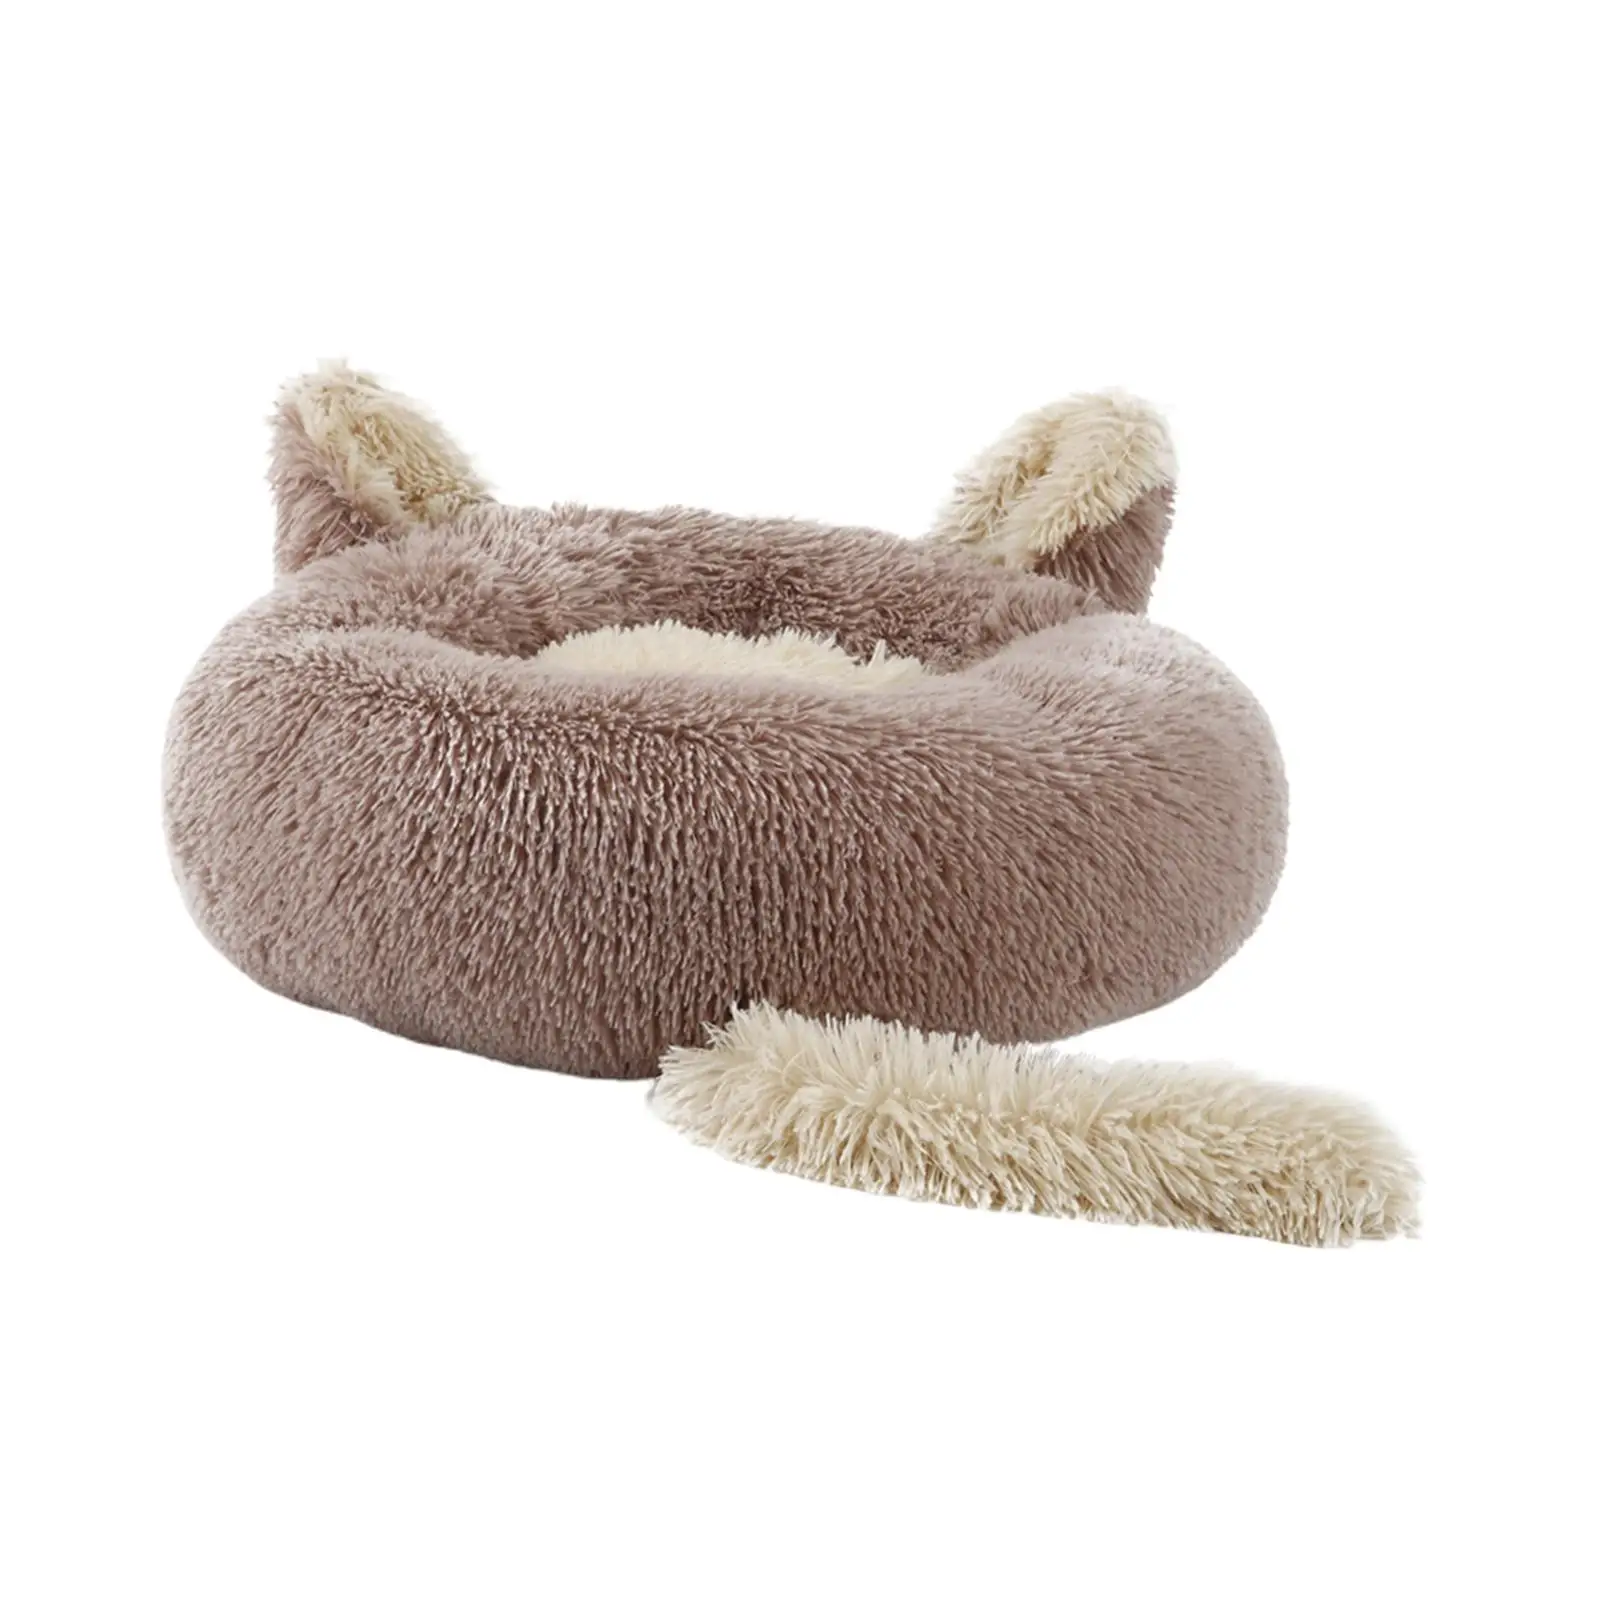 Round Pet Blanket Dog Bed Anti Slip Bottom Nest Washable Soft Comfortable Hut Cat Warm House for Kitty Rest Playing Kitten Puppy